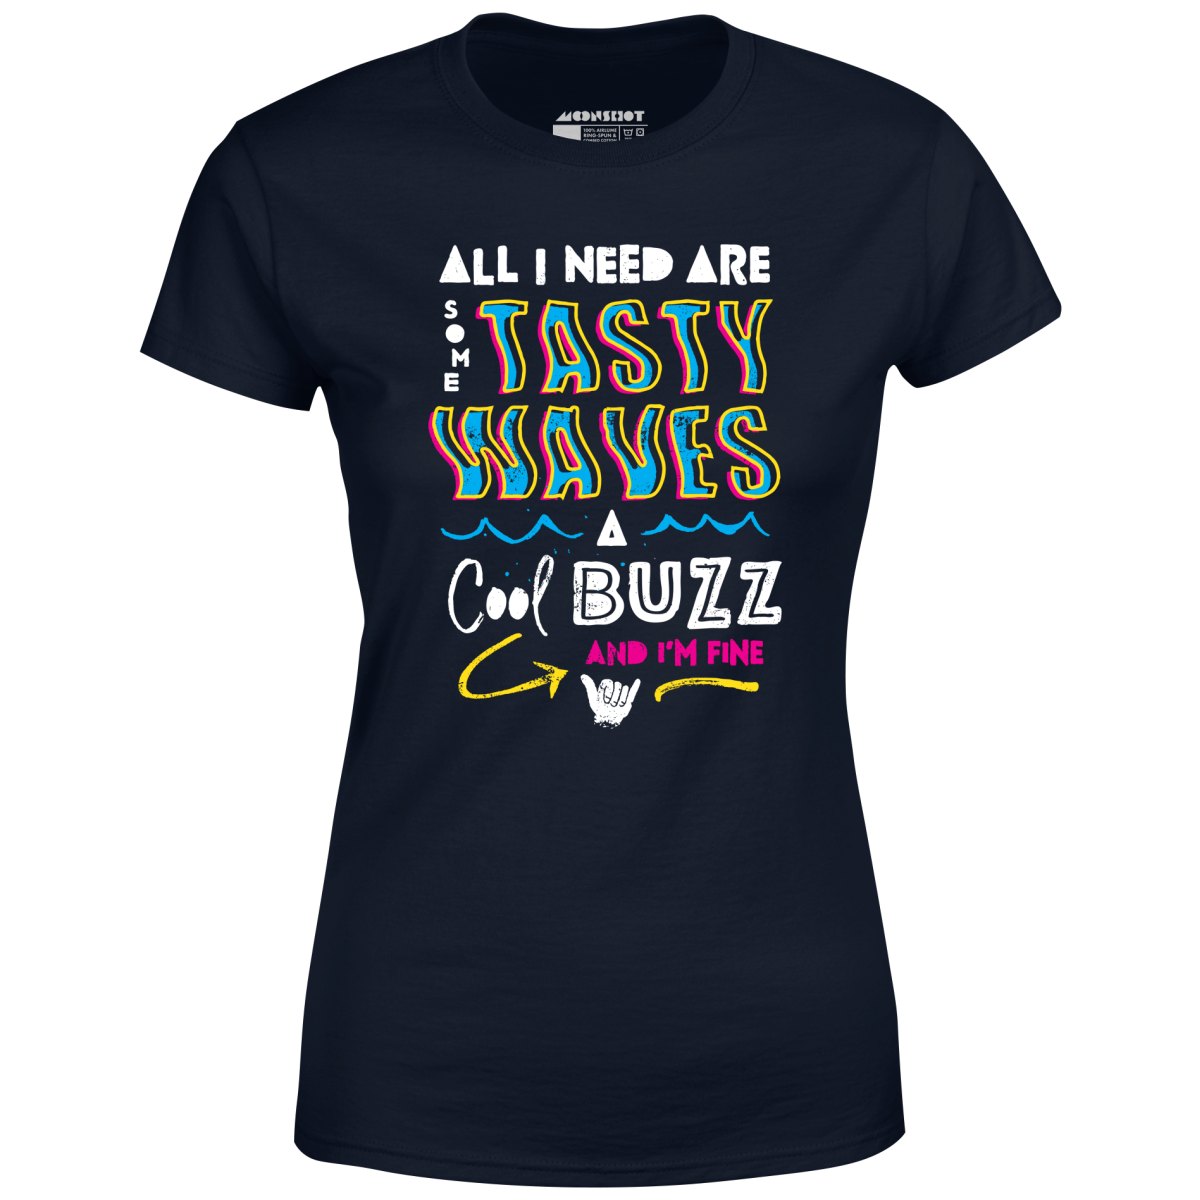 All I Need Are Some Tasty Waves a Cool Buzz and I'm Fine - Women's T-Shirt